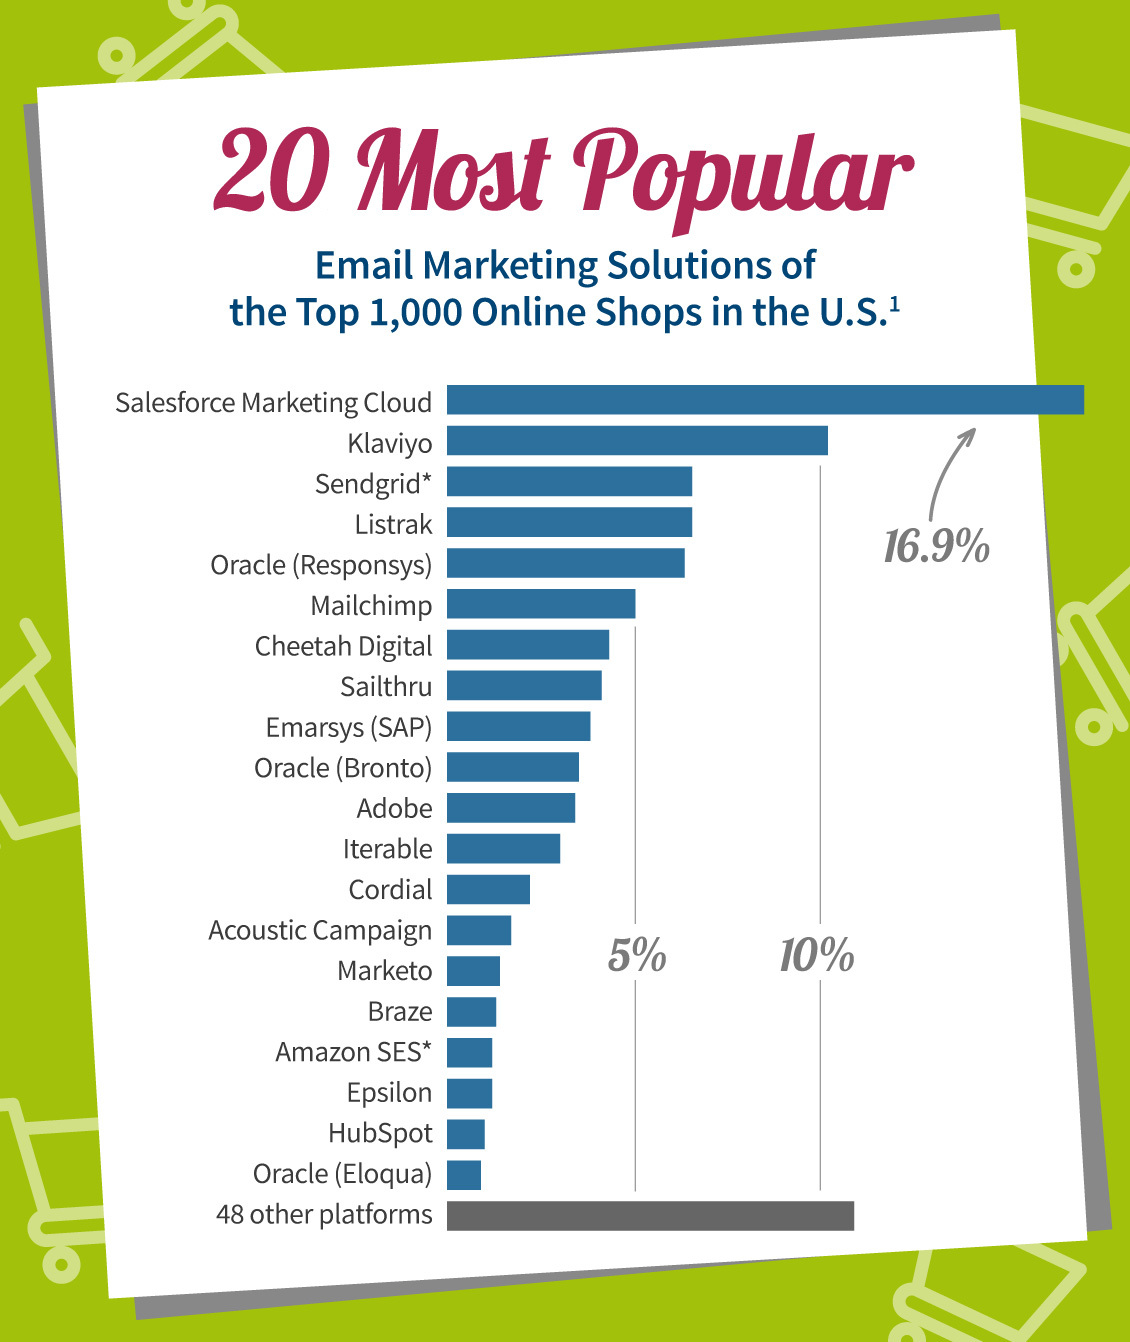 Publicare-ecommerce-study-us-top1000-the-20-most-popular-email-marketing-solutions